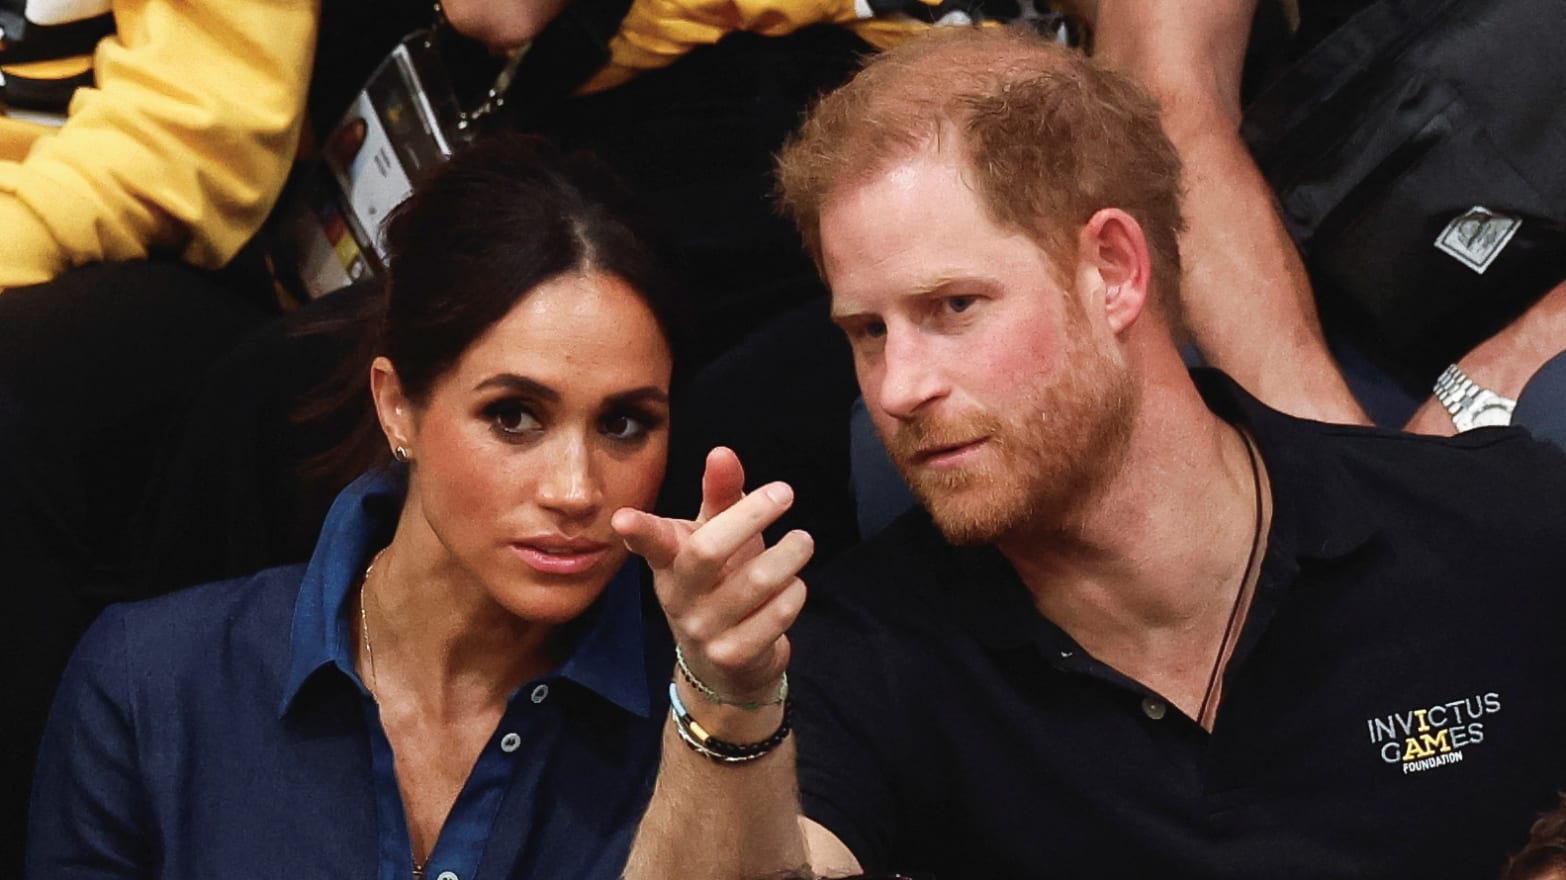 Britain's Prince Harry, Duke of Sussex and his wife Meghan, Duchess of Sussex, attend the sitting volleyball finals at the 2023 Invictus Games in Duesseldorf, Germany September 15, 2023.